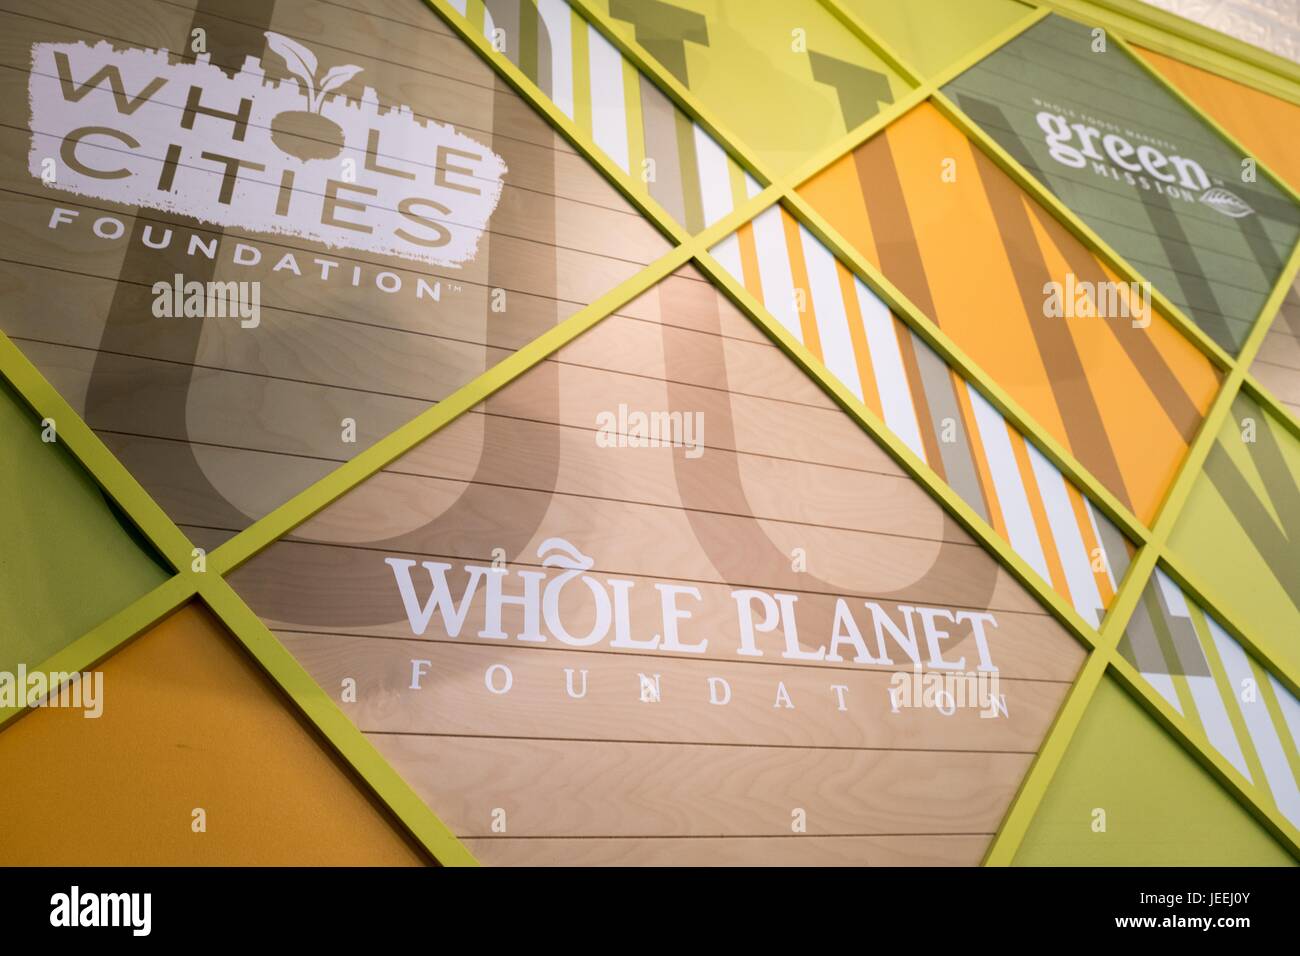 Signage for the Whole Planet Foundation, Whole Cities Foundation, and other charitable foundations at the Whole Foods Market grocery store in Dublin, California, June 16, 2017. Stock Photo